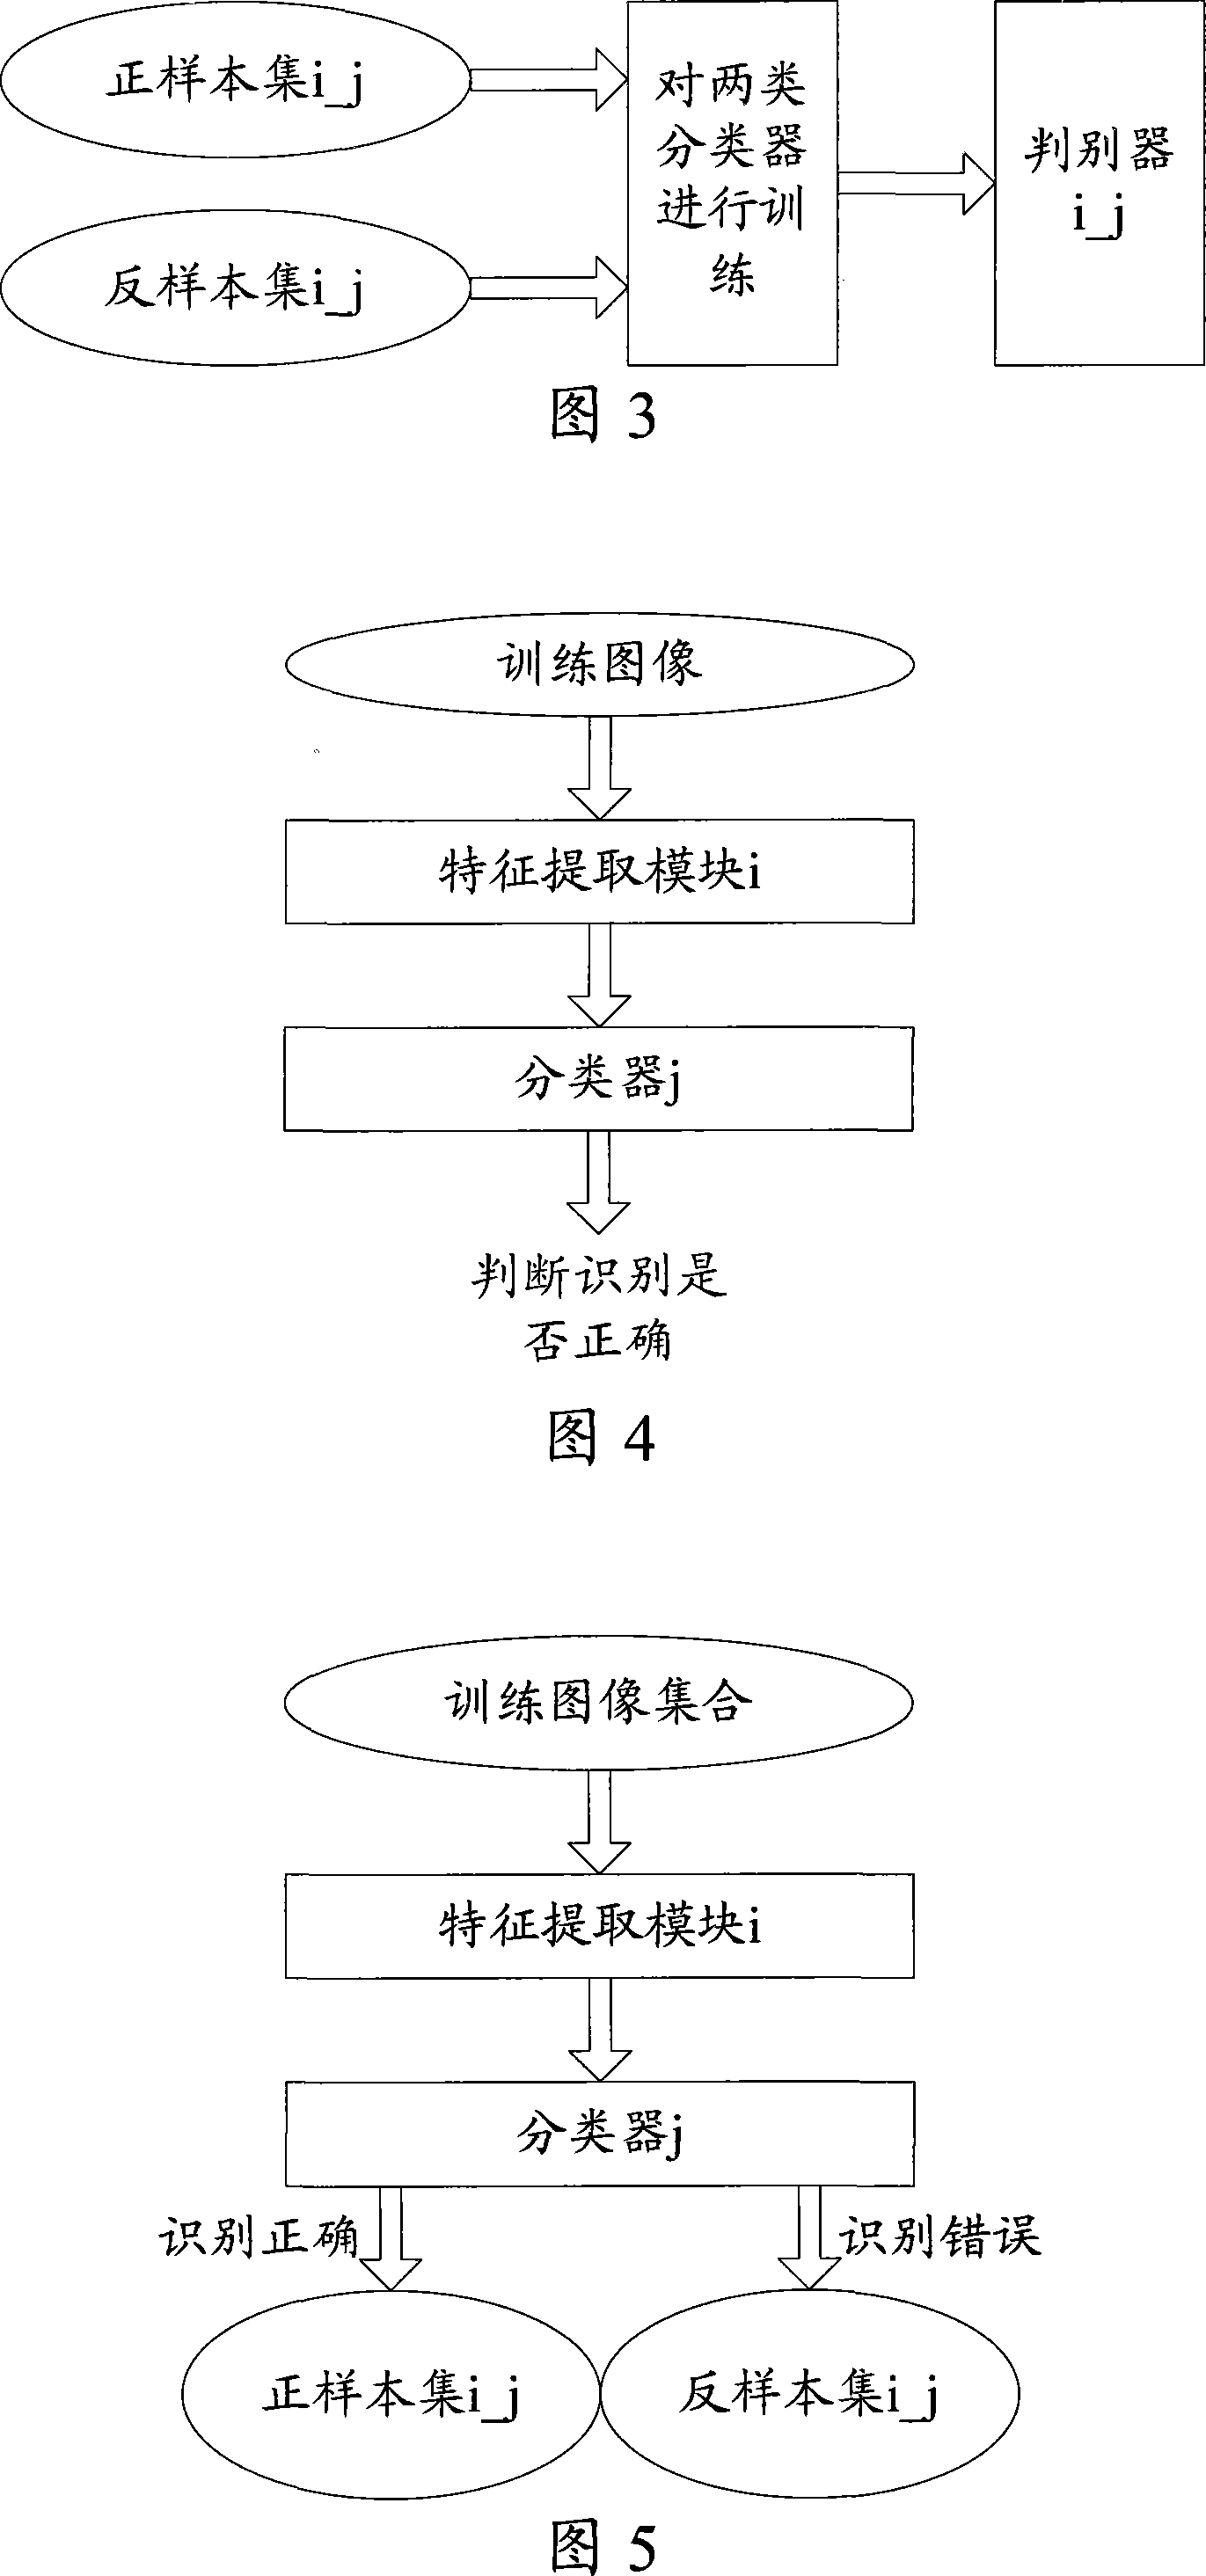 Image recognition system and method based on characteristic extracting and categorizer